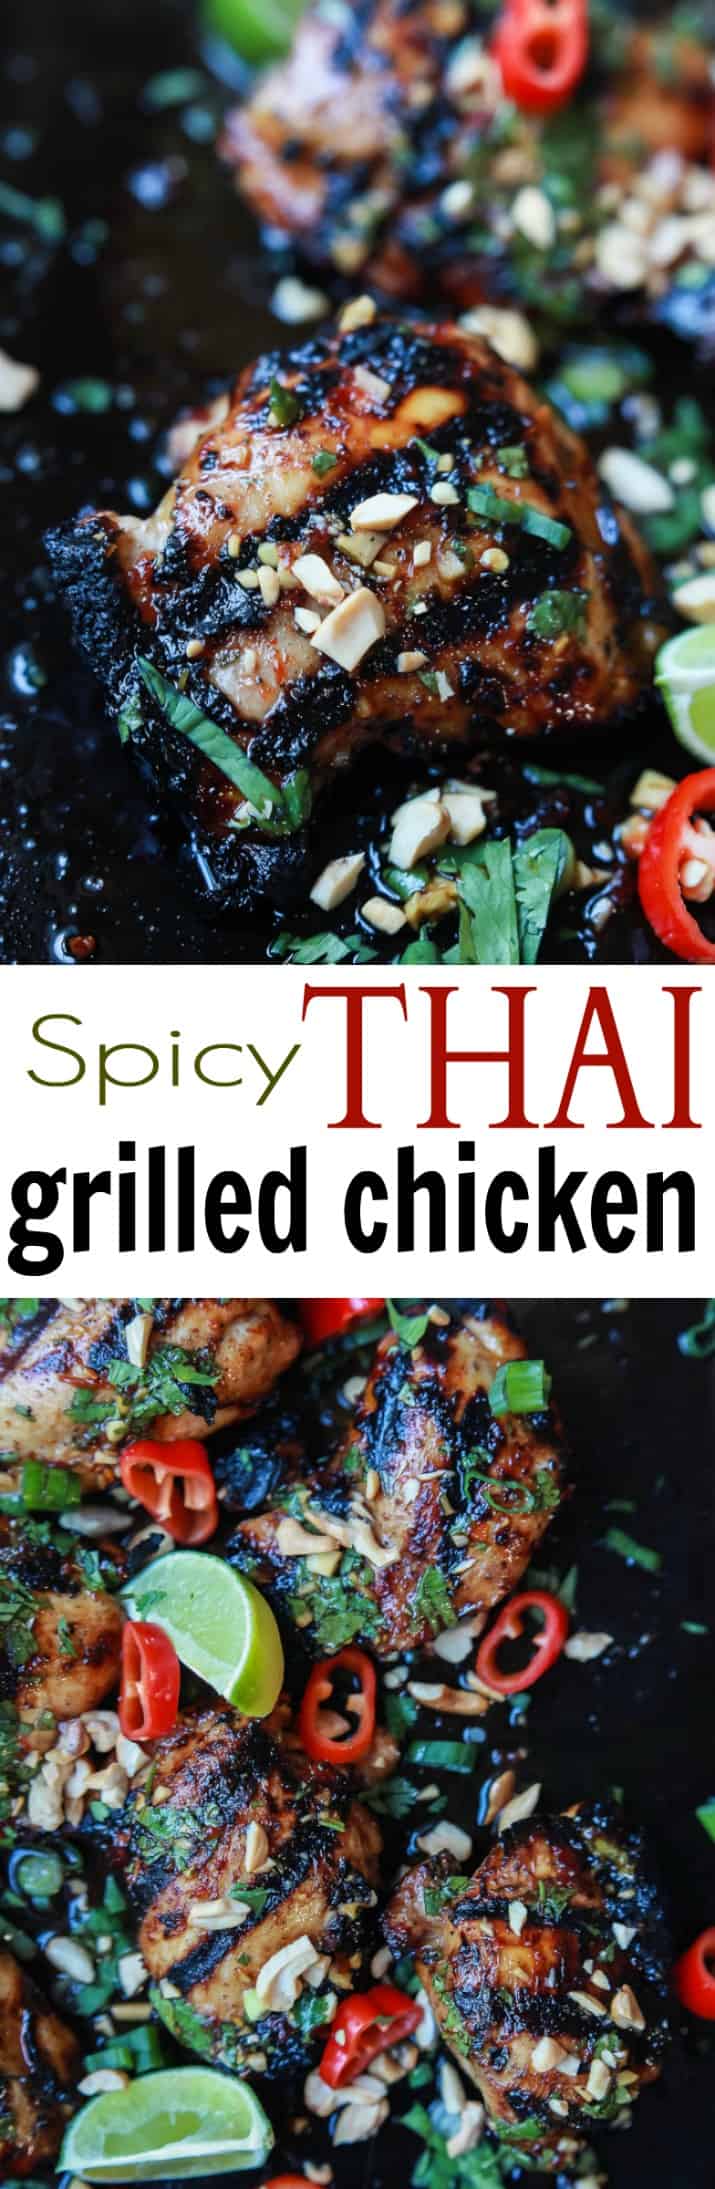 Gluten Free Spicy Thai Grilled Chicken, filled with bold asian flavors, extremely moist tender meat, and easy enough for a weeknight! A meal so irresistible your family is going to fall in love! | joyfulhealthyeats.com